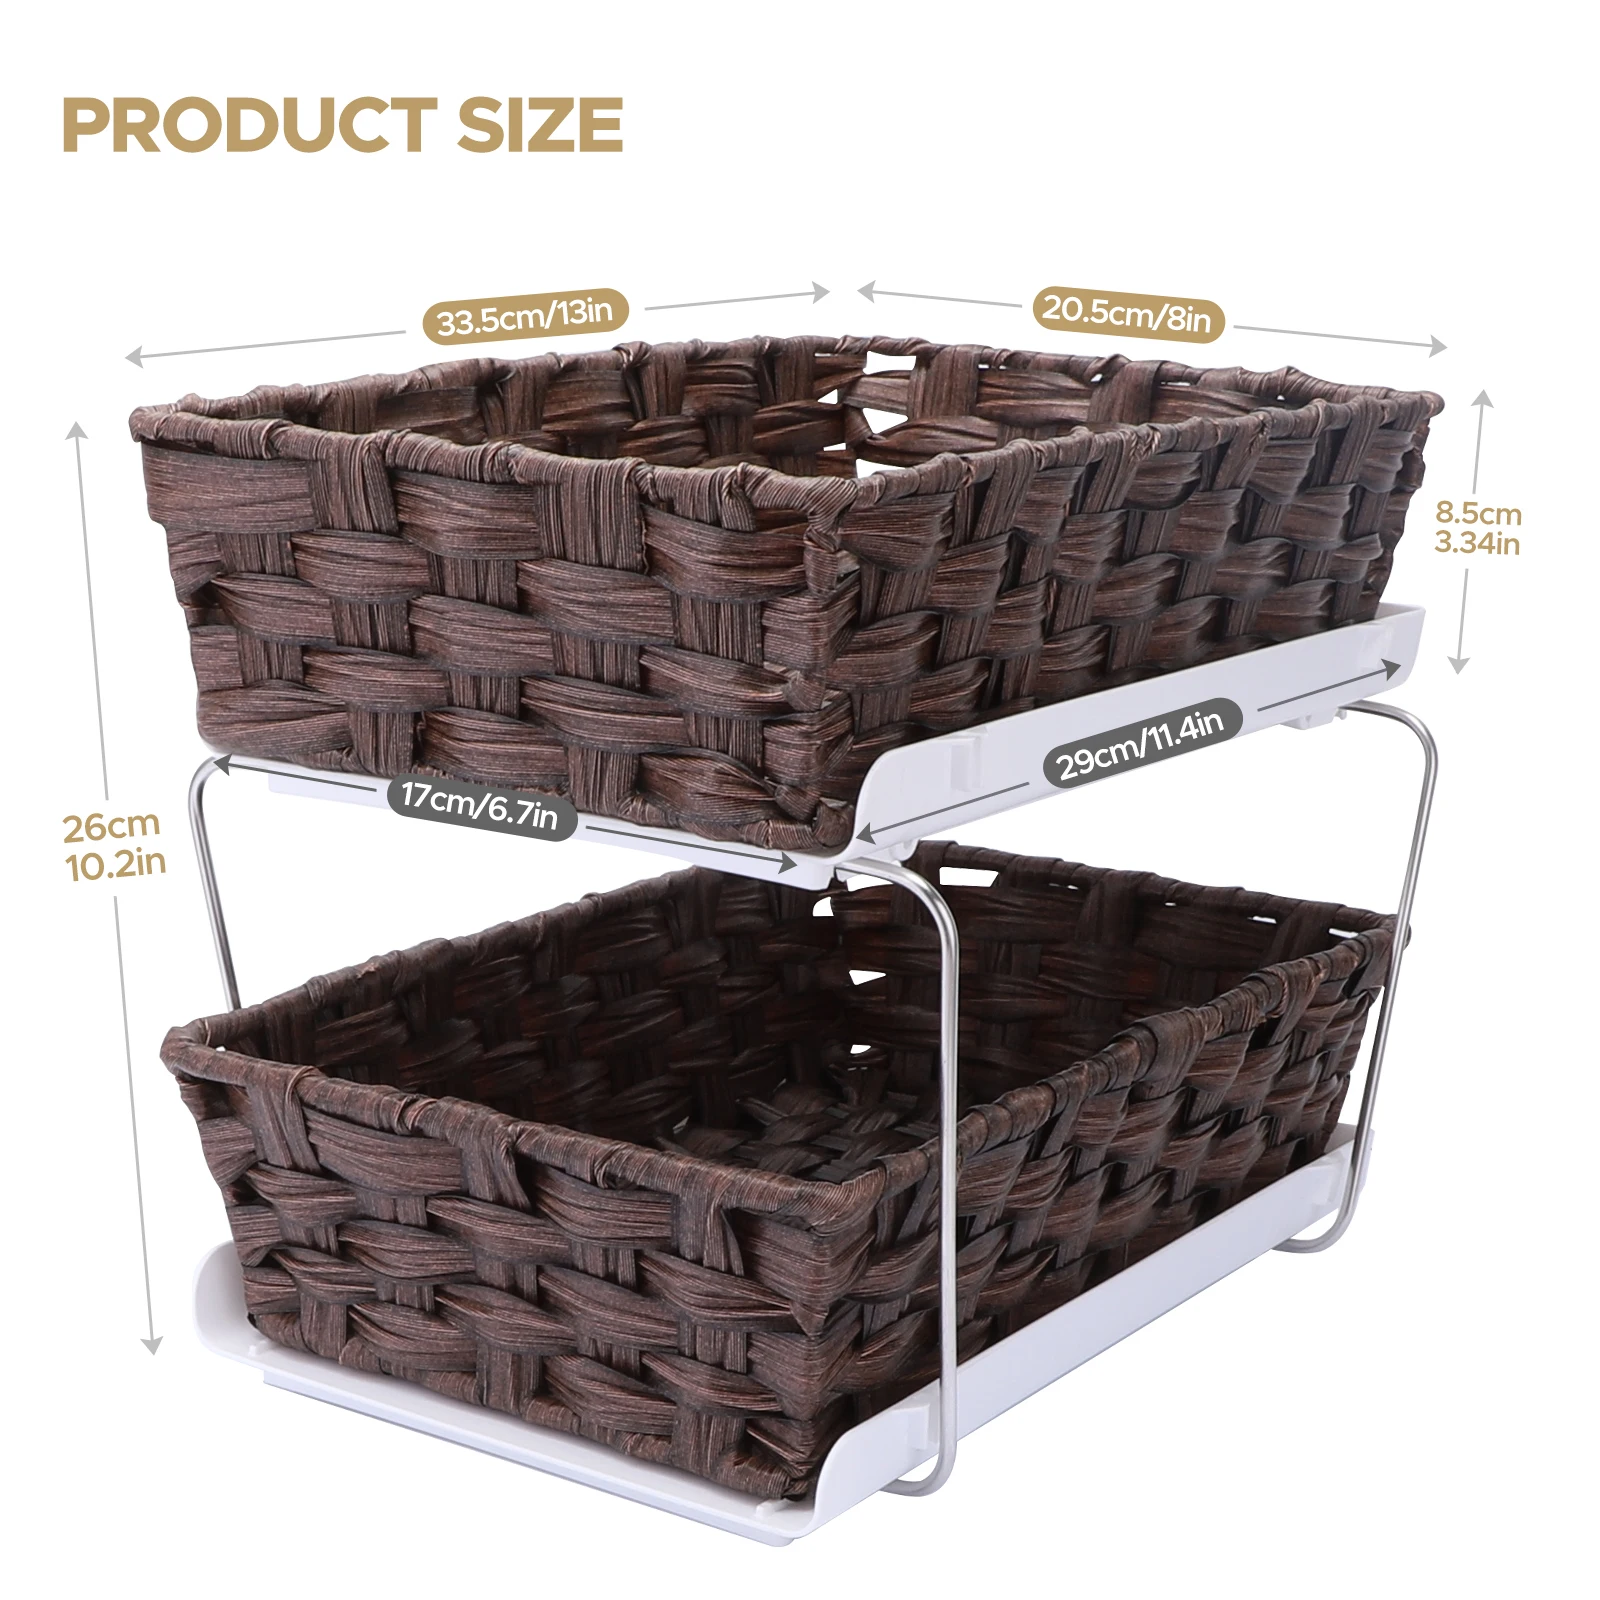 Lxmons 2 Tier Basket Drawer Organizer, Pull Out Under Sink